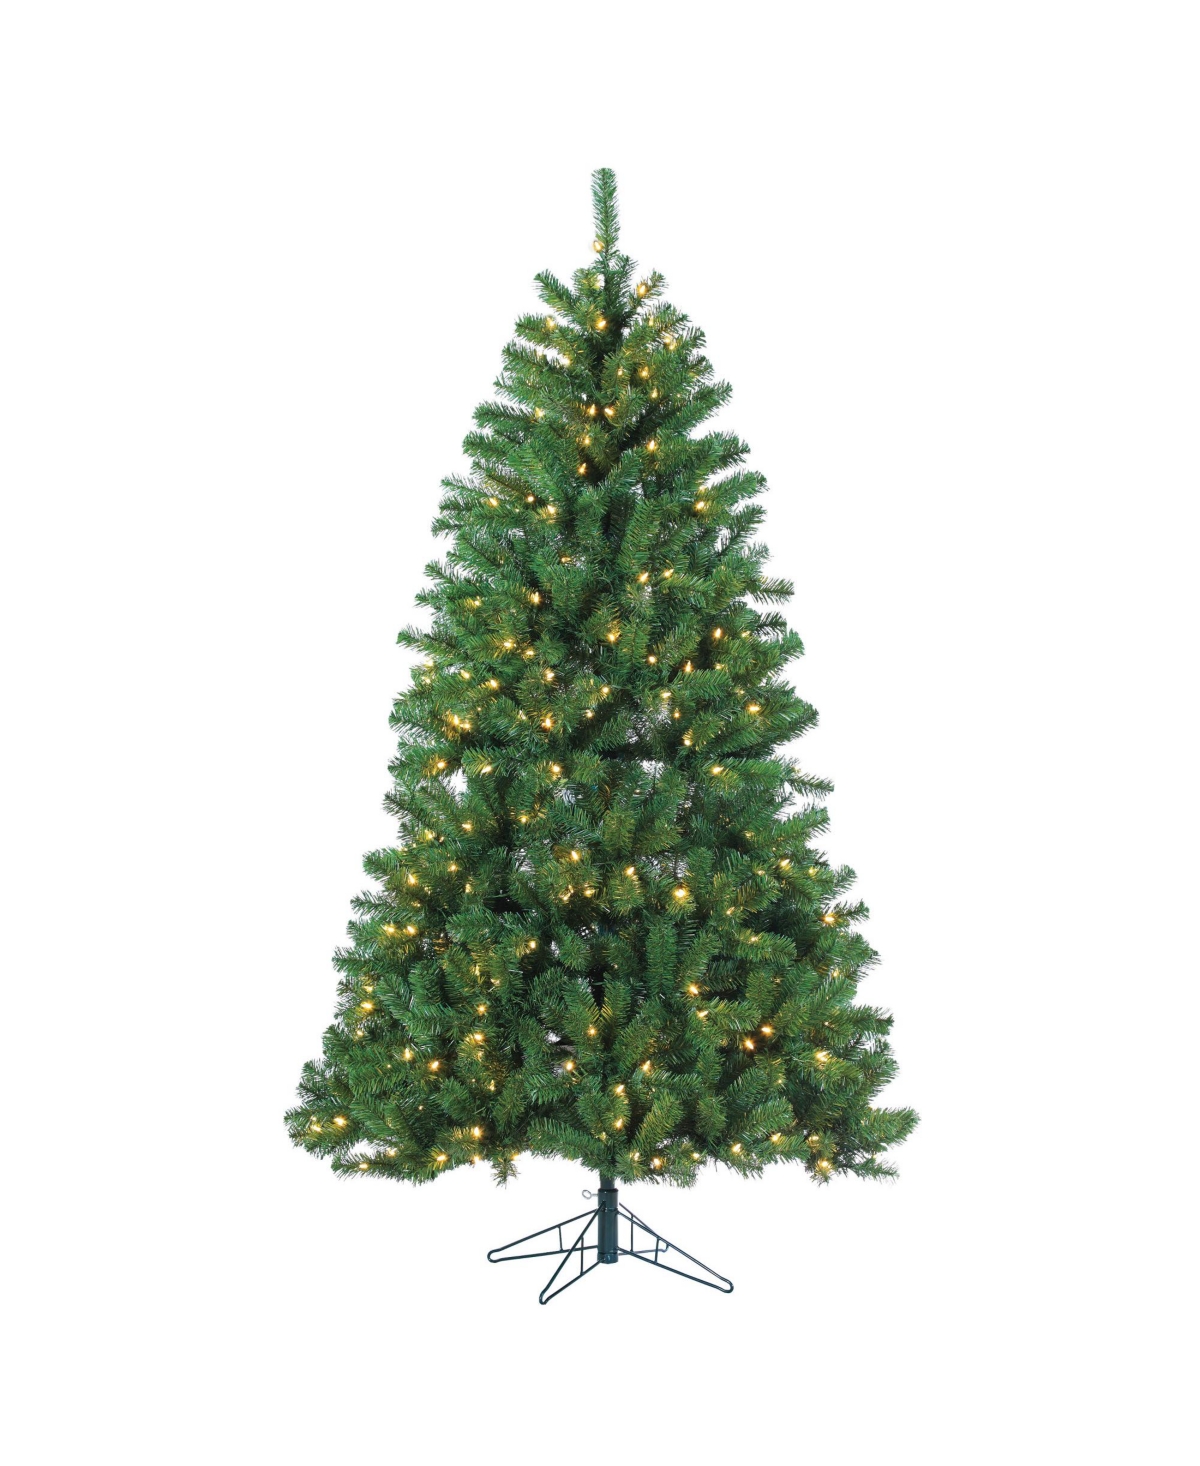 7Ft. Pre-Lit Montana Pine with 400 warm white Led lights - Green